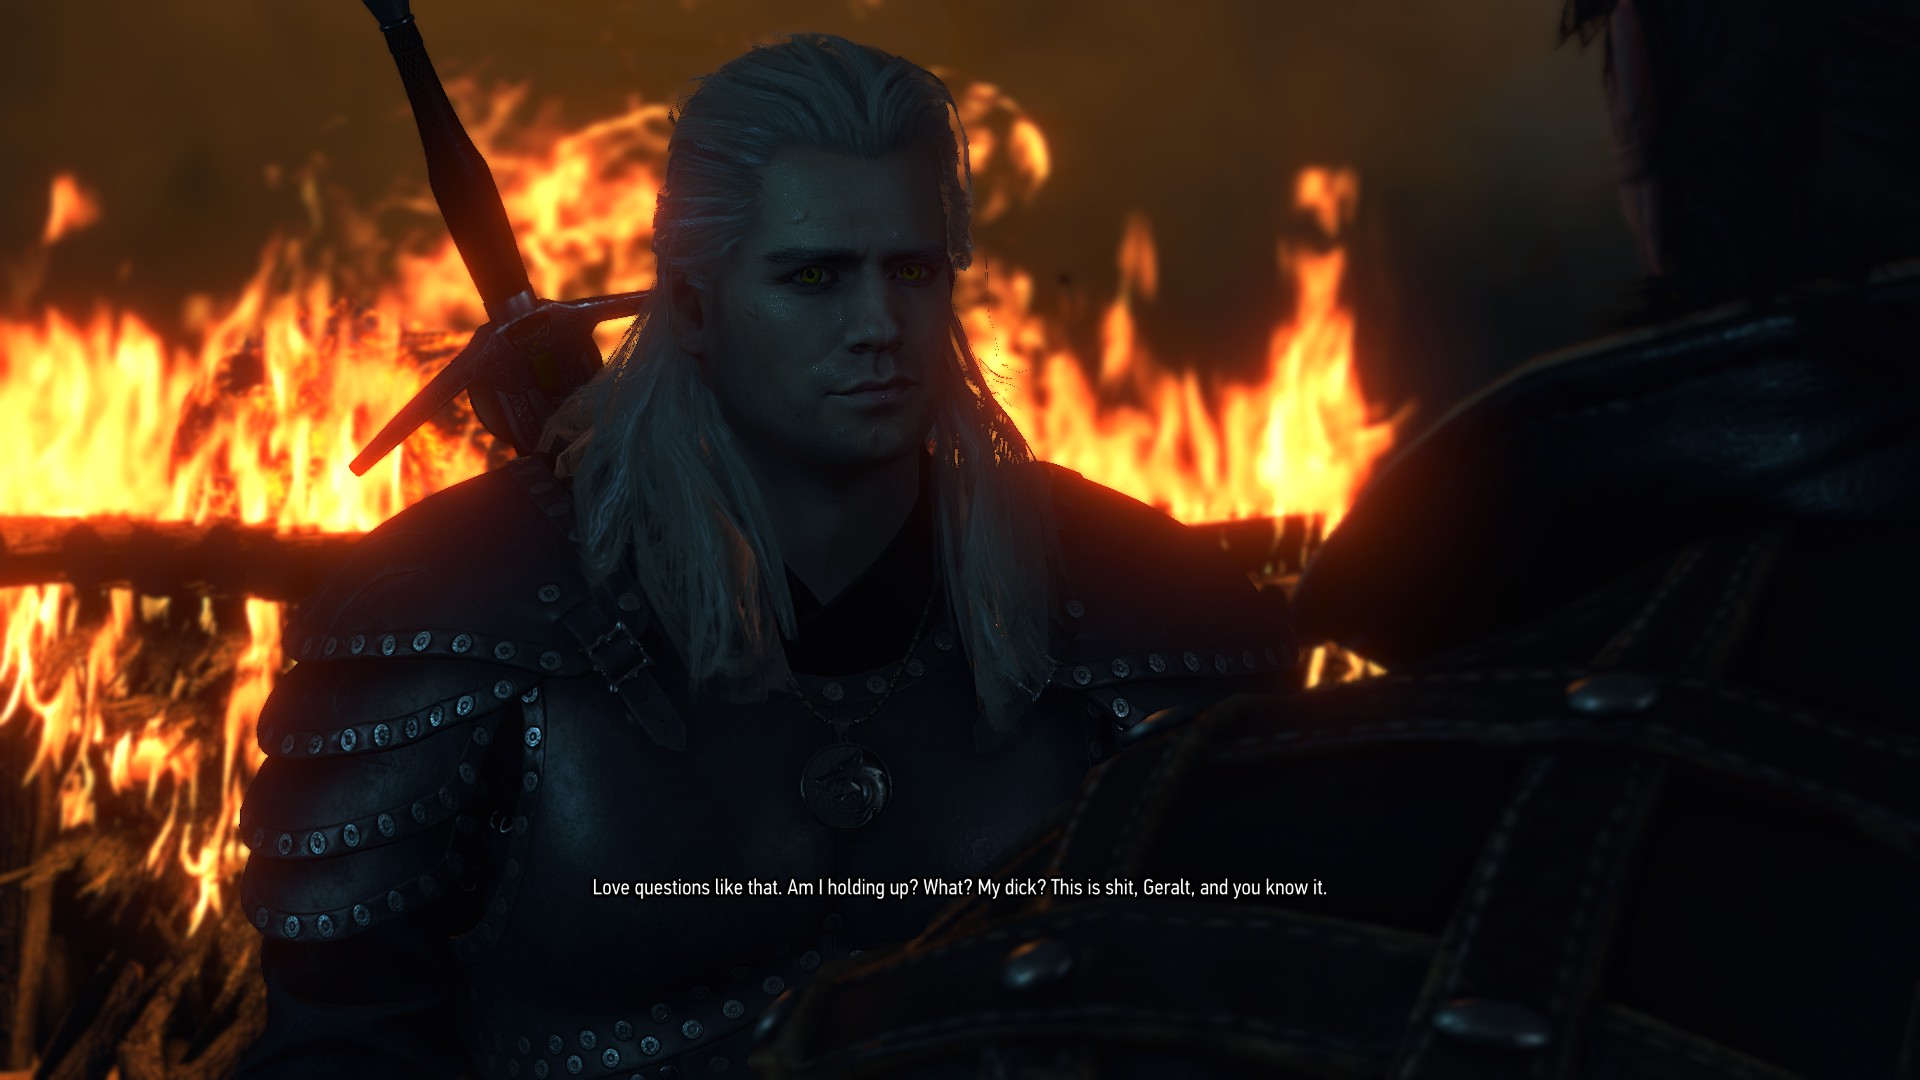 The witcher 3 console nexus фото 72